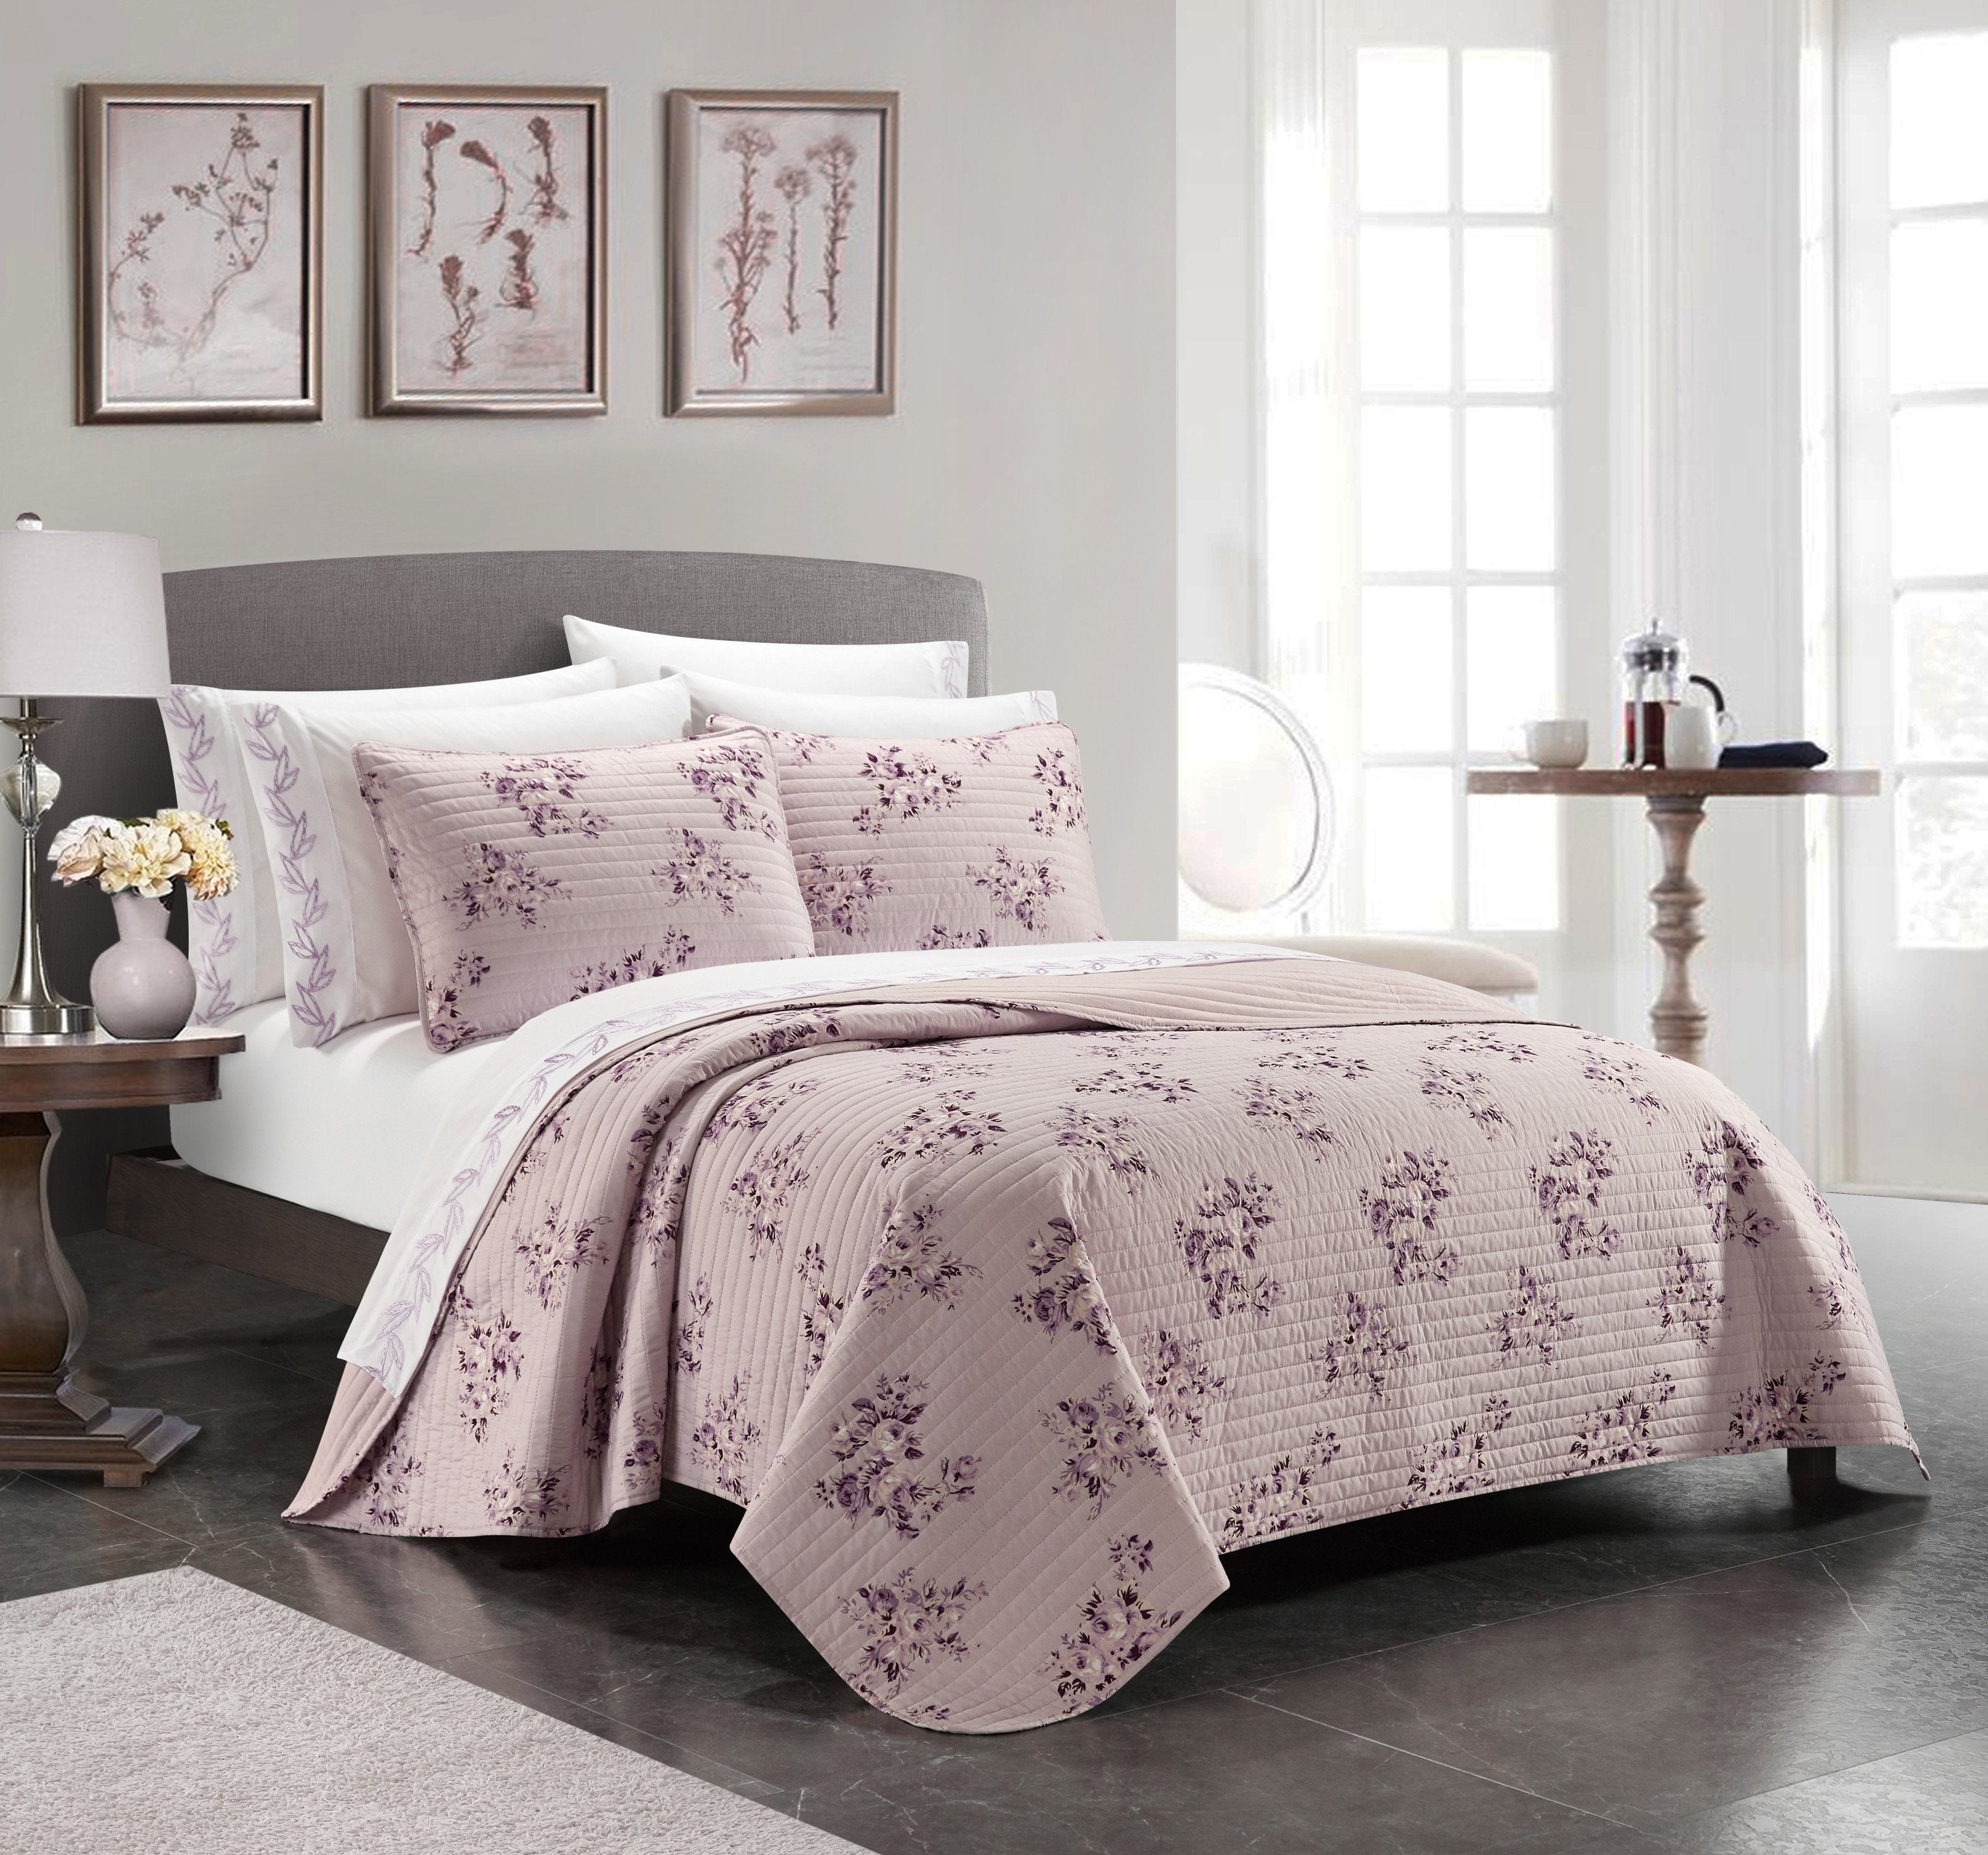 Giverny 9 Piece Floral Print Quilt Set